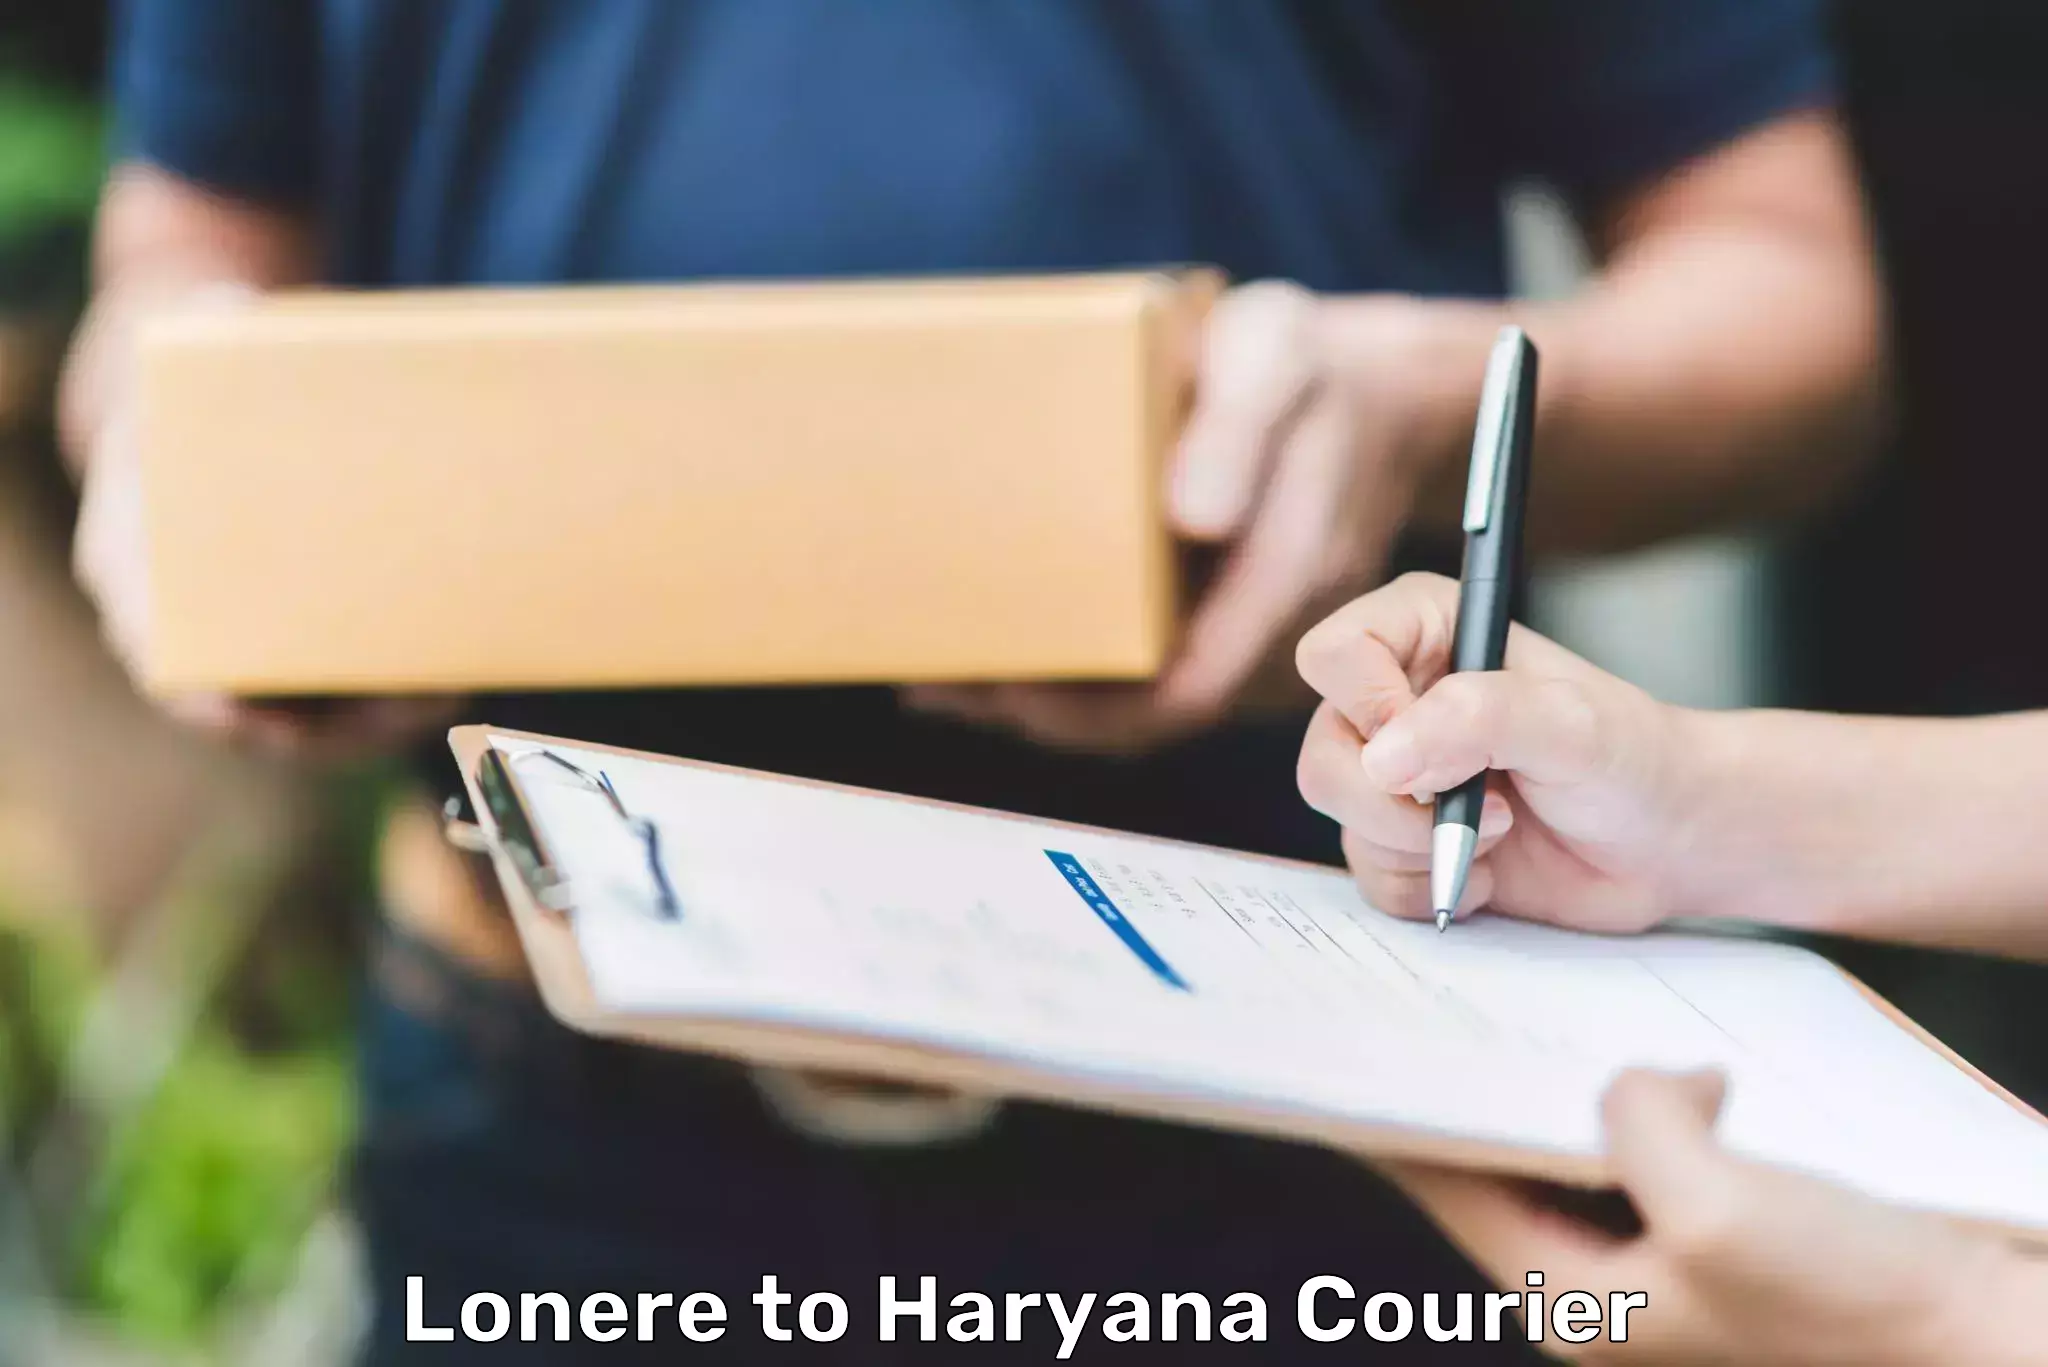 Express delivery network Lonere to Hansi